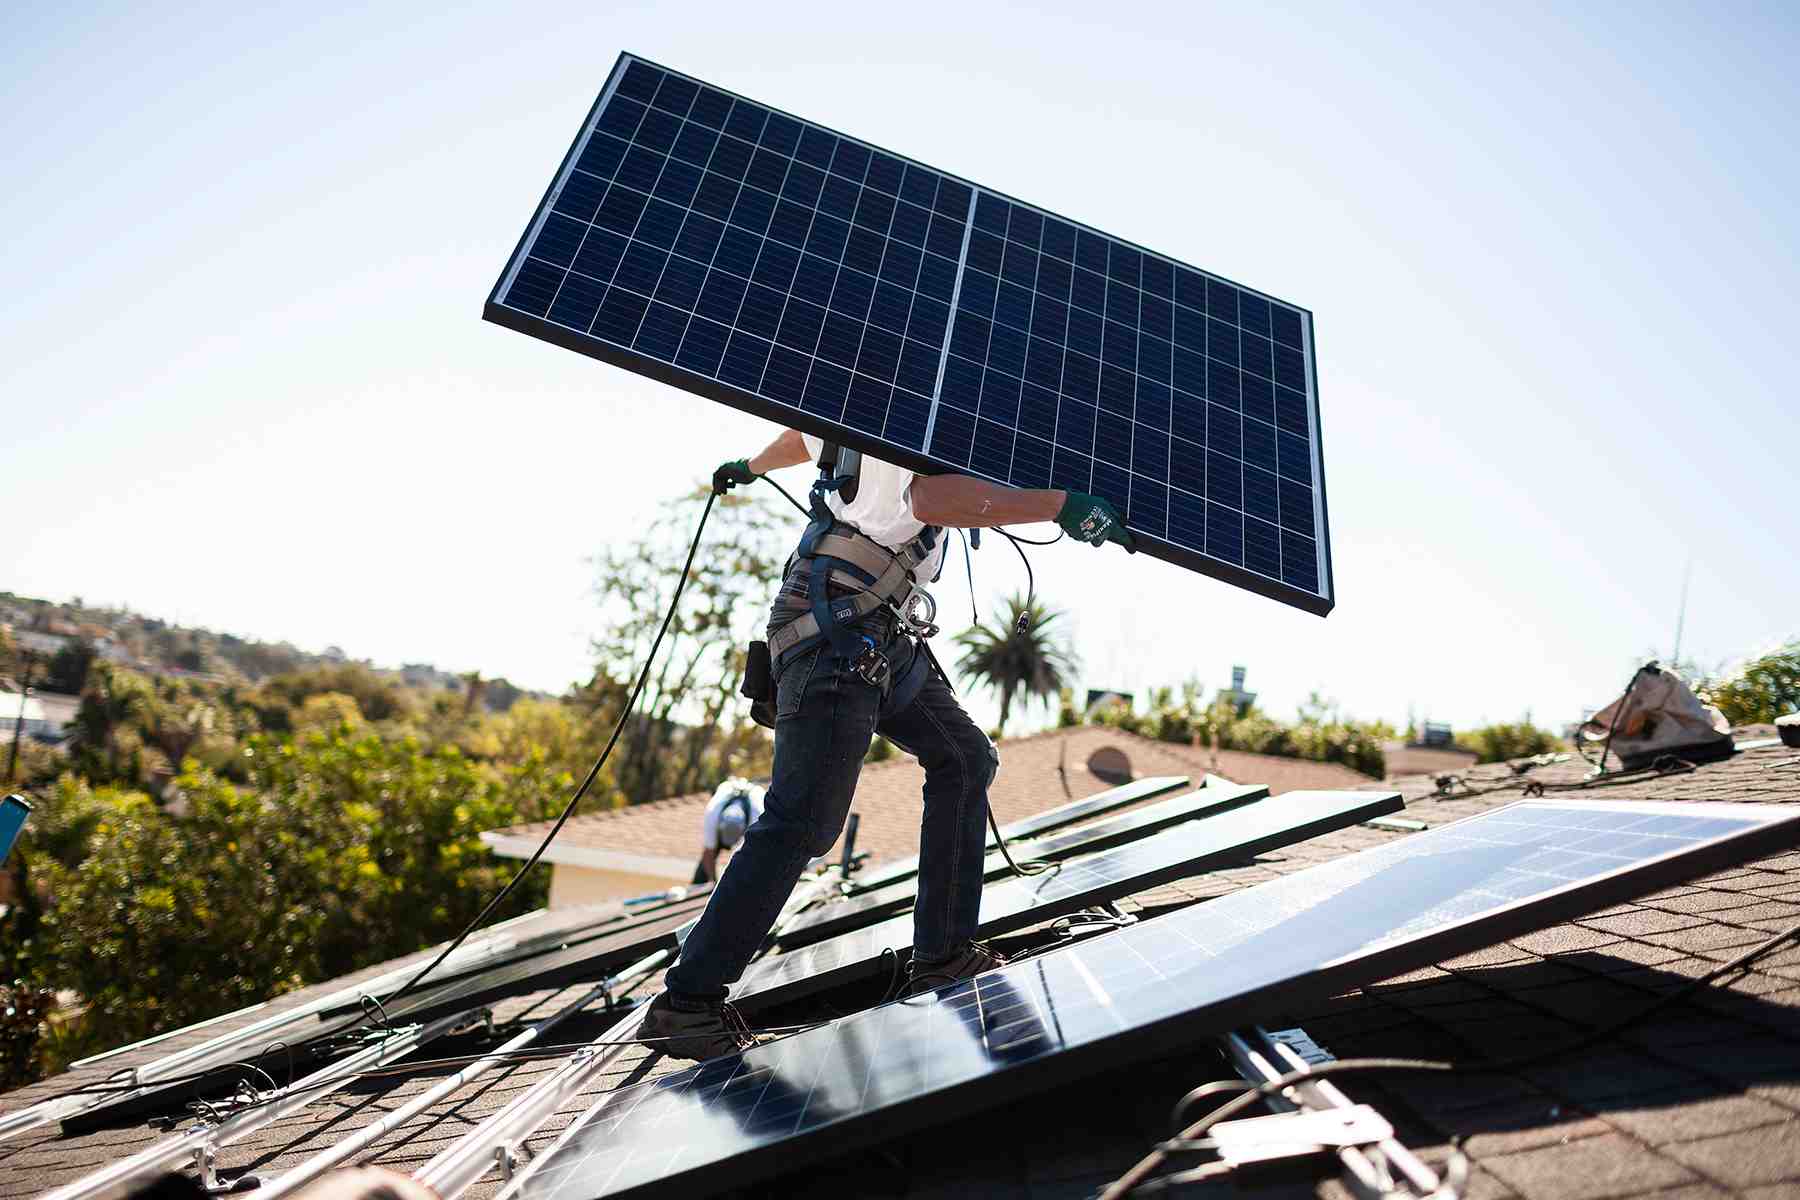 How do you calculate if solar is worth it?